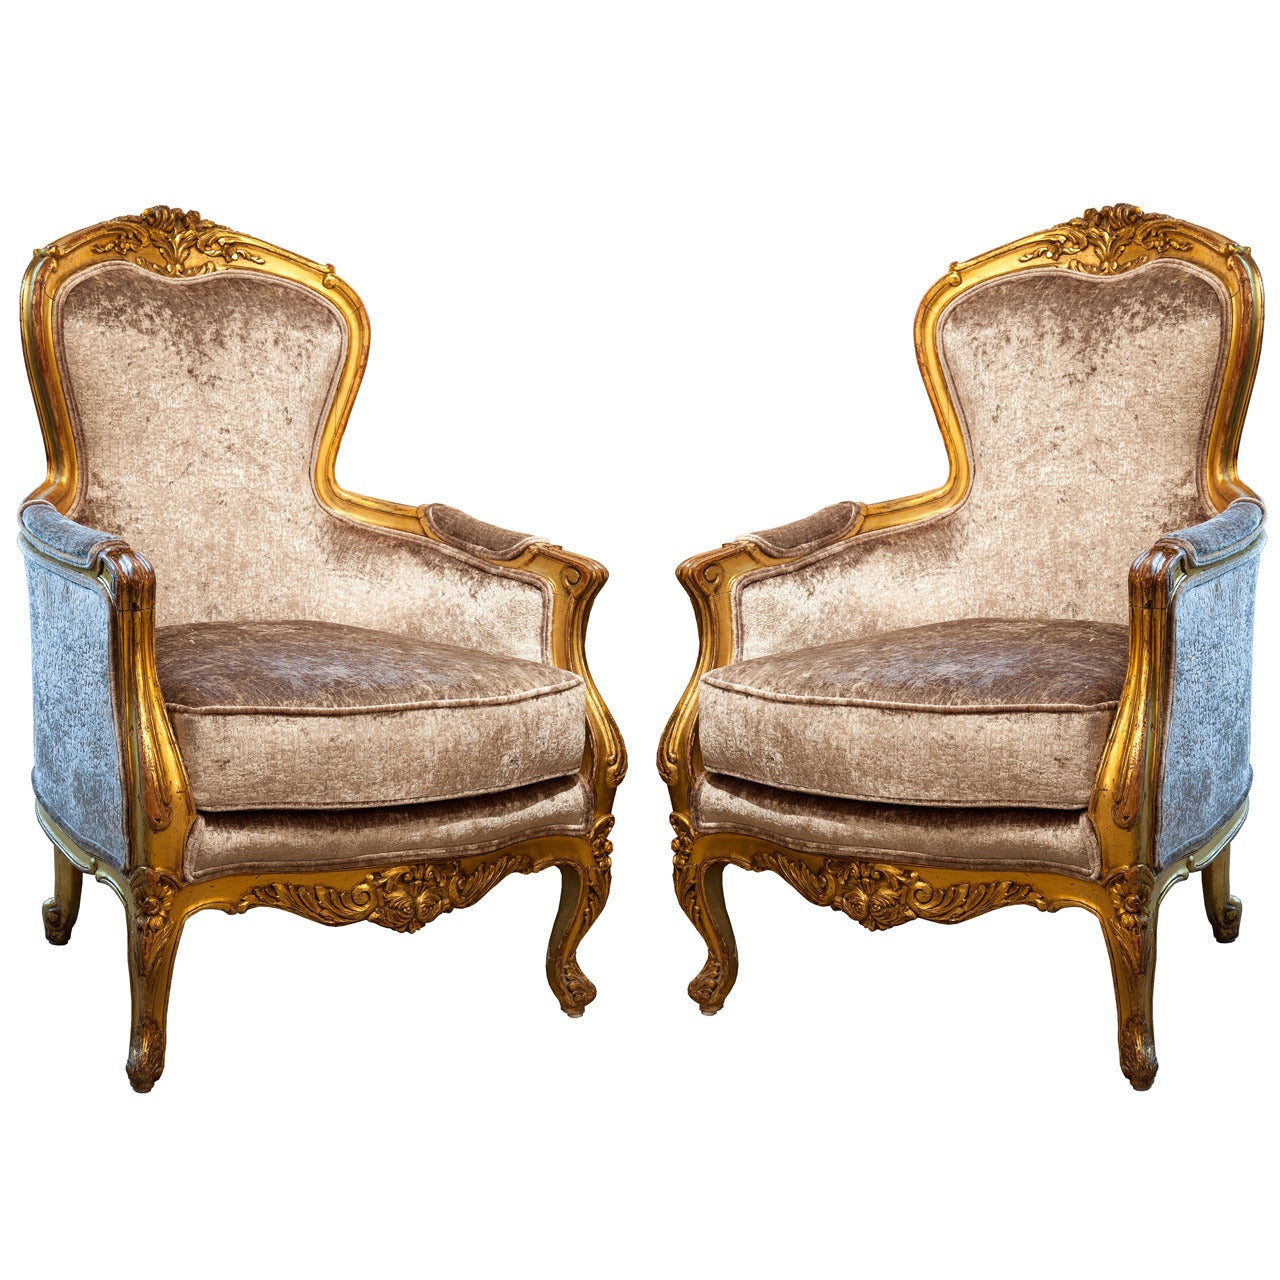 Antique  French  19th c gilt wood Bergere Chairs